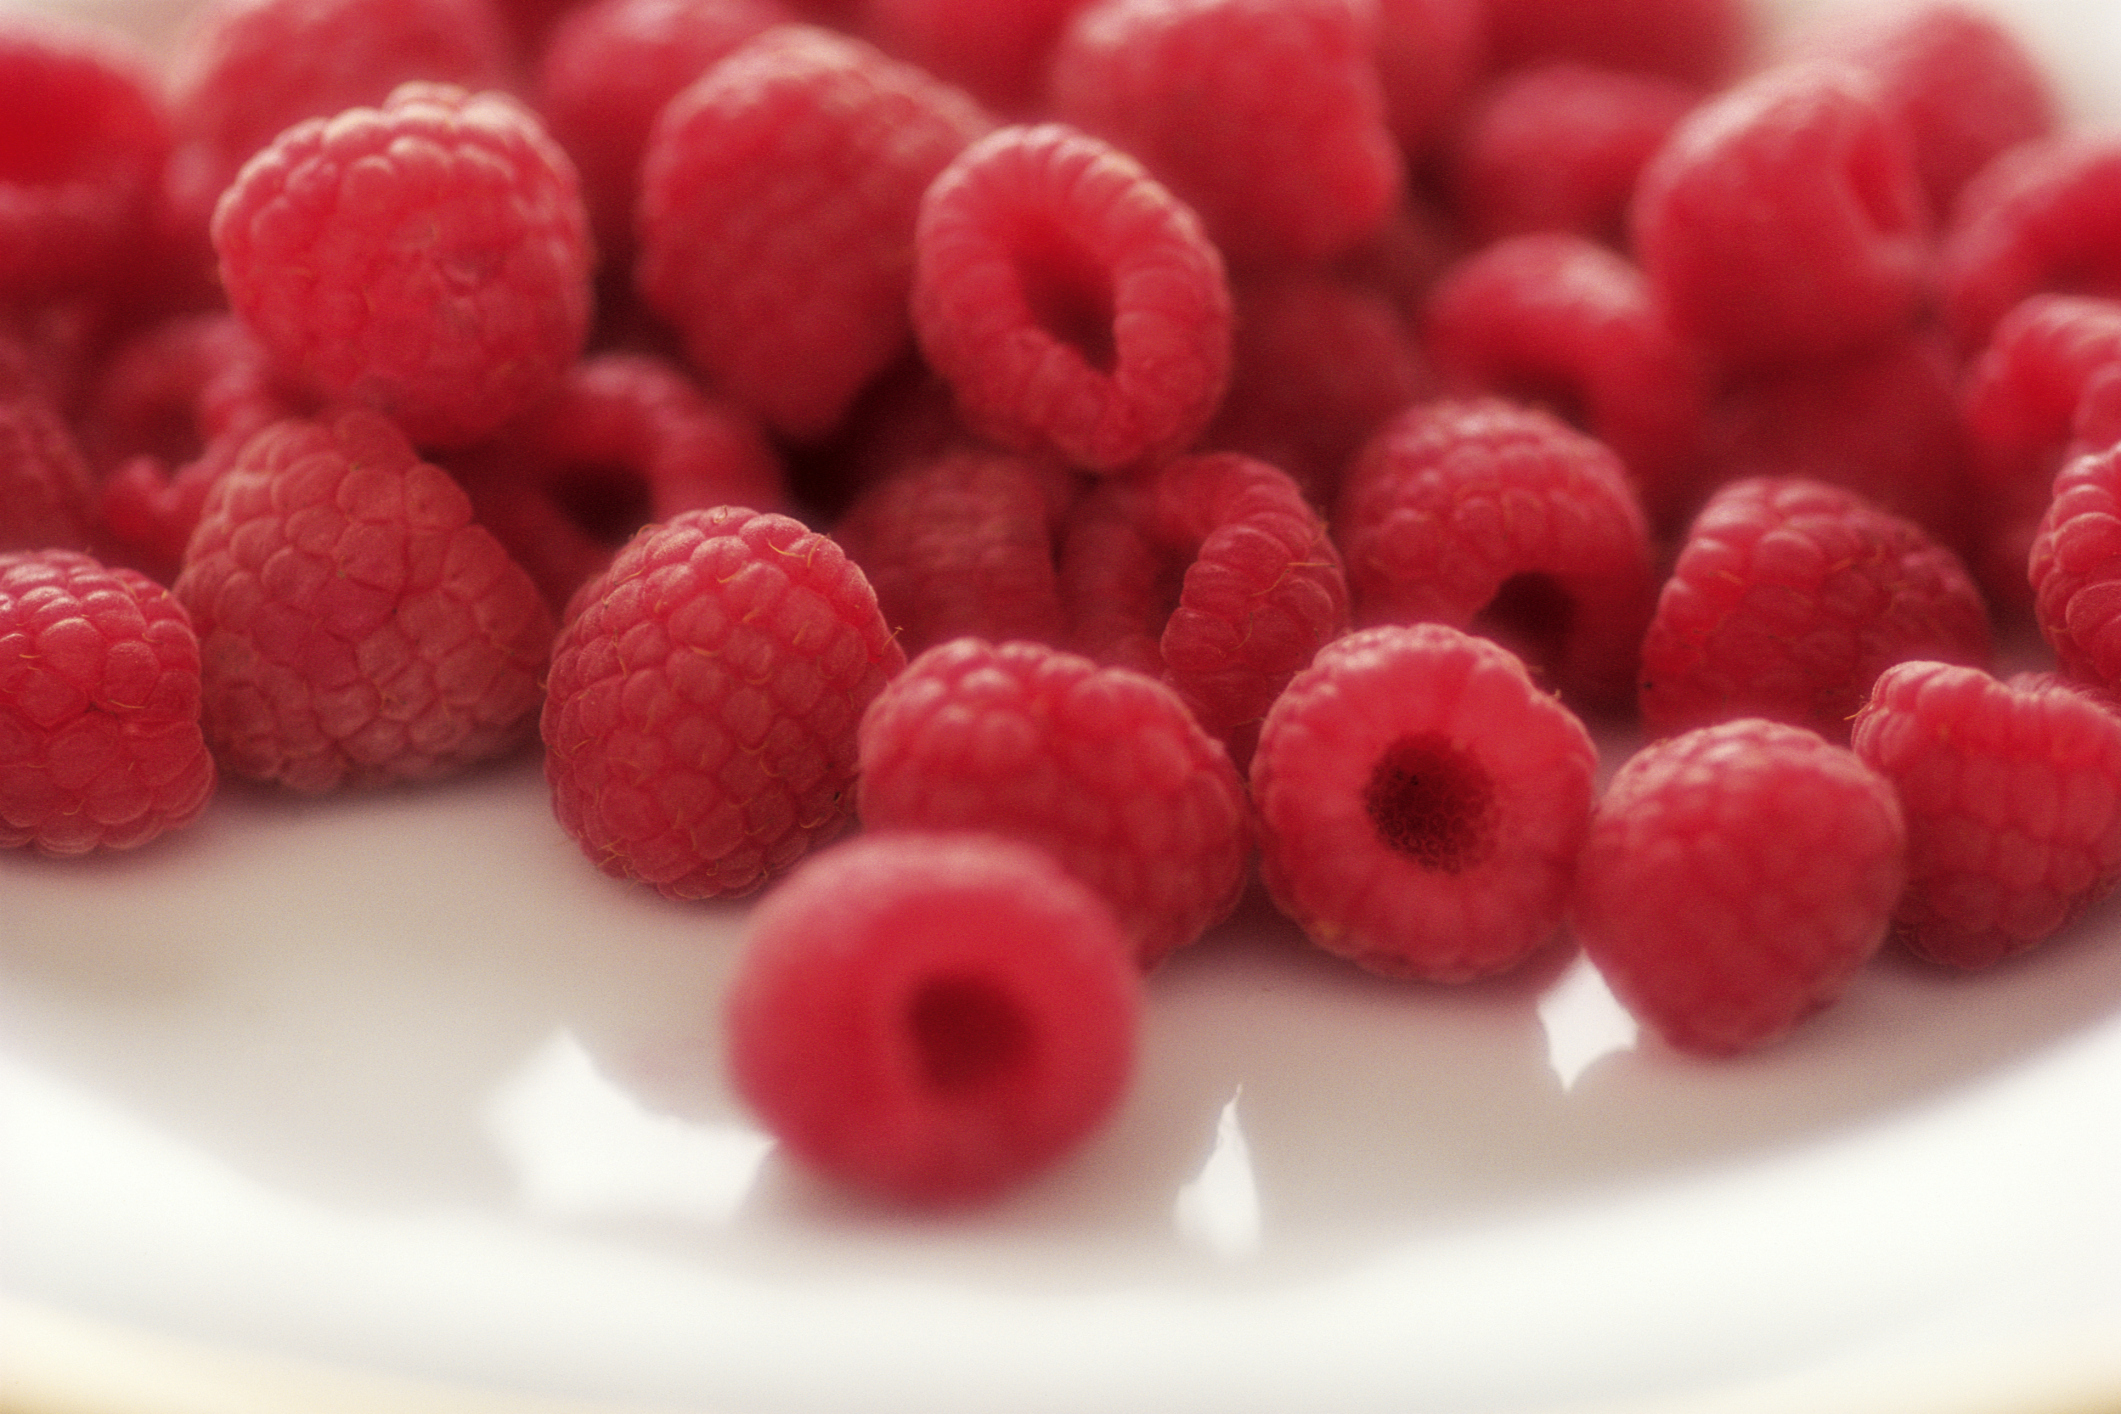 What Are the Benefits of Red Raspberries? | LIVESTRONG.COM